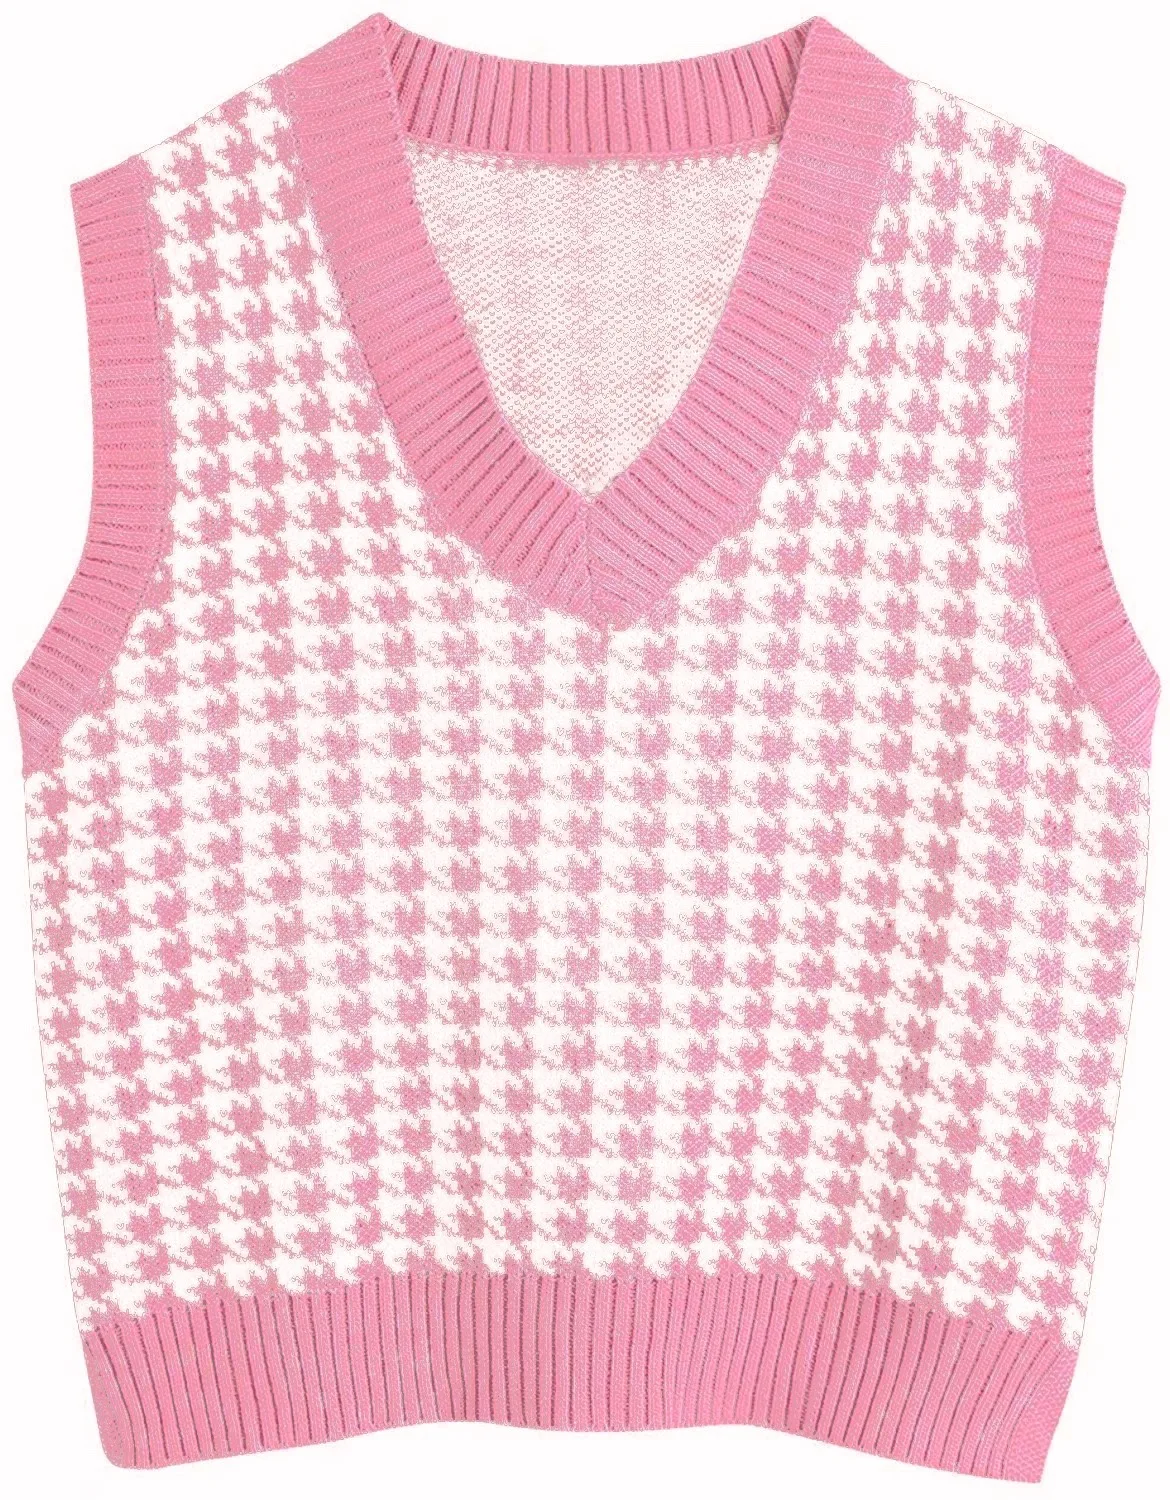 

Autumn Winter Women Houndstooth Vest Knitted Sweater Oversized Vintage V-neck Plaid Sleeveless Print Jacket Casual Bottoming Top